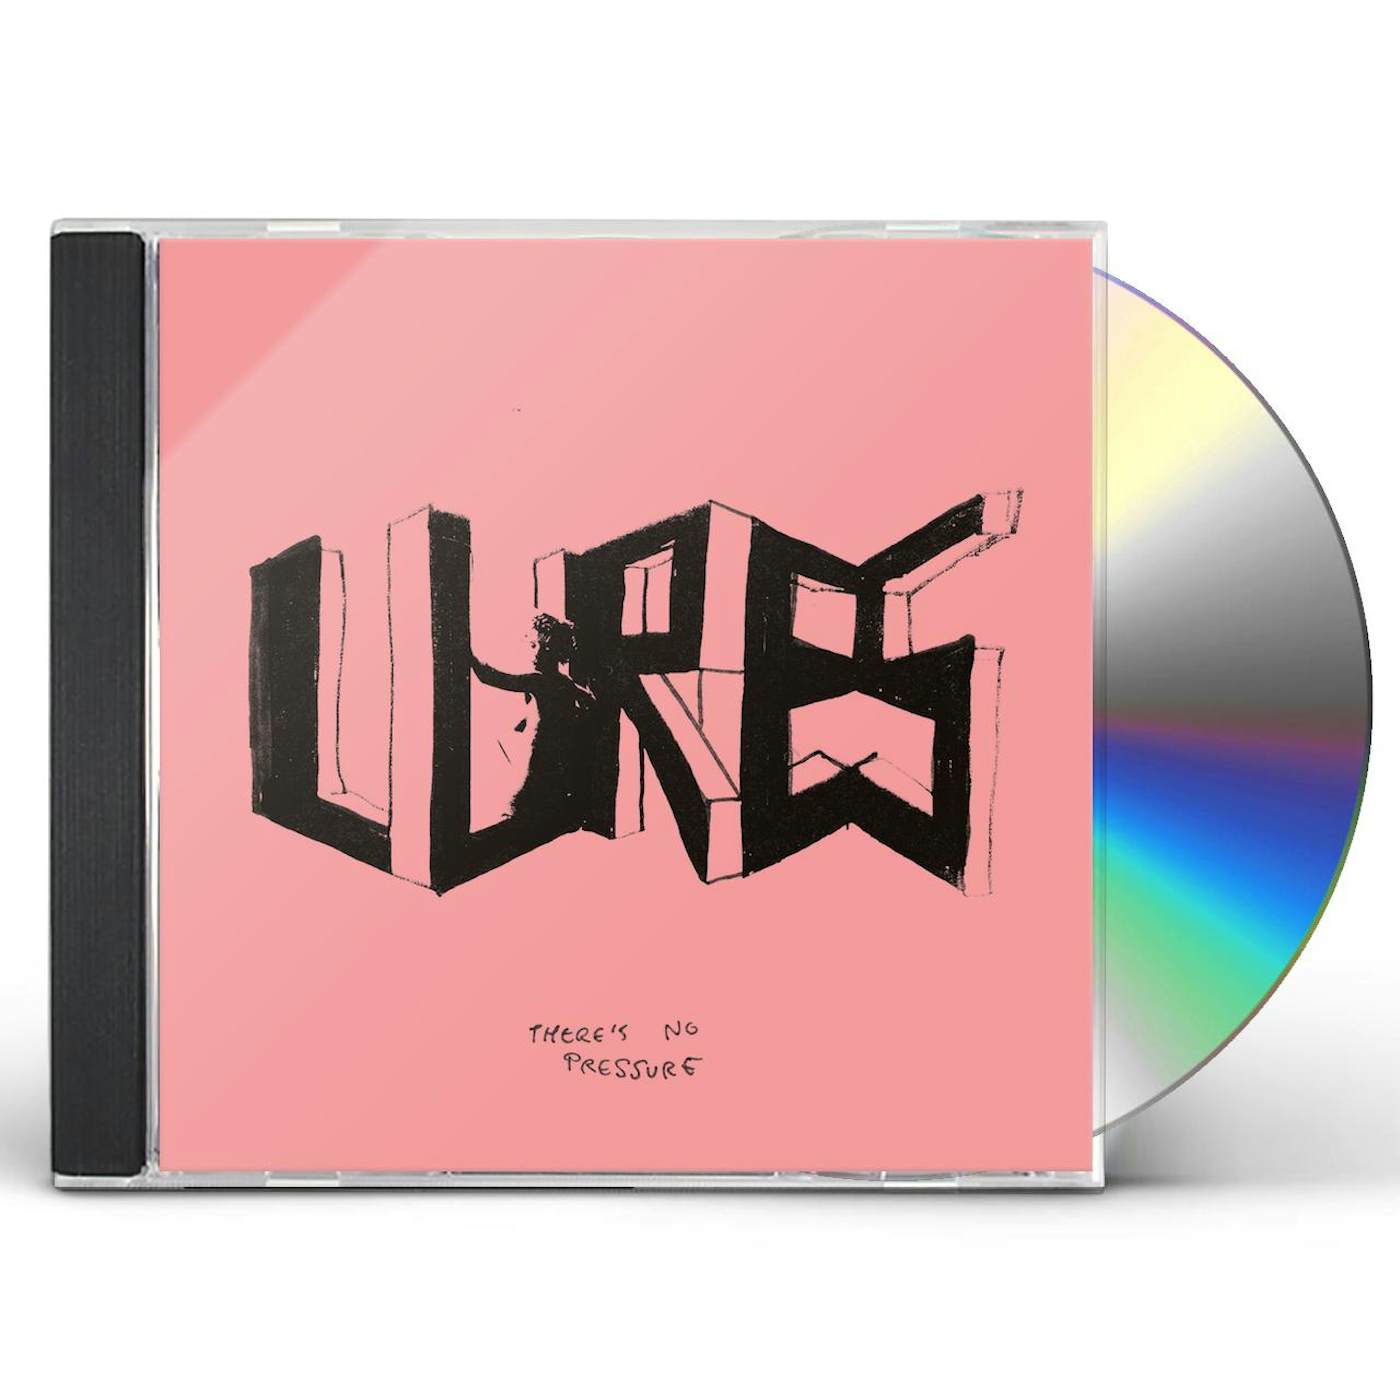 Lures THERE'S NO PRESSURE CD